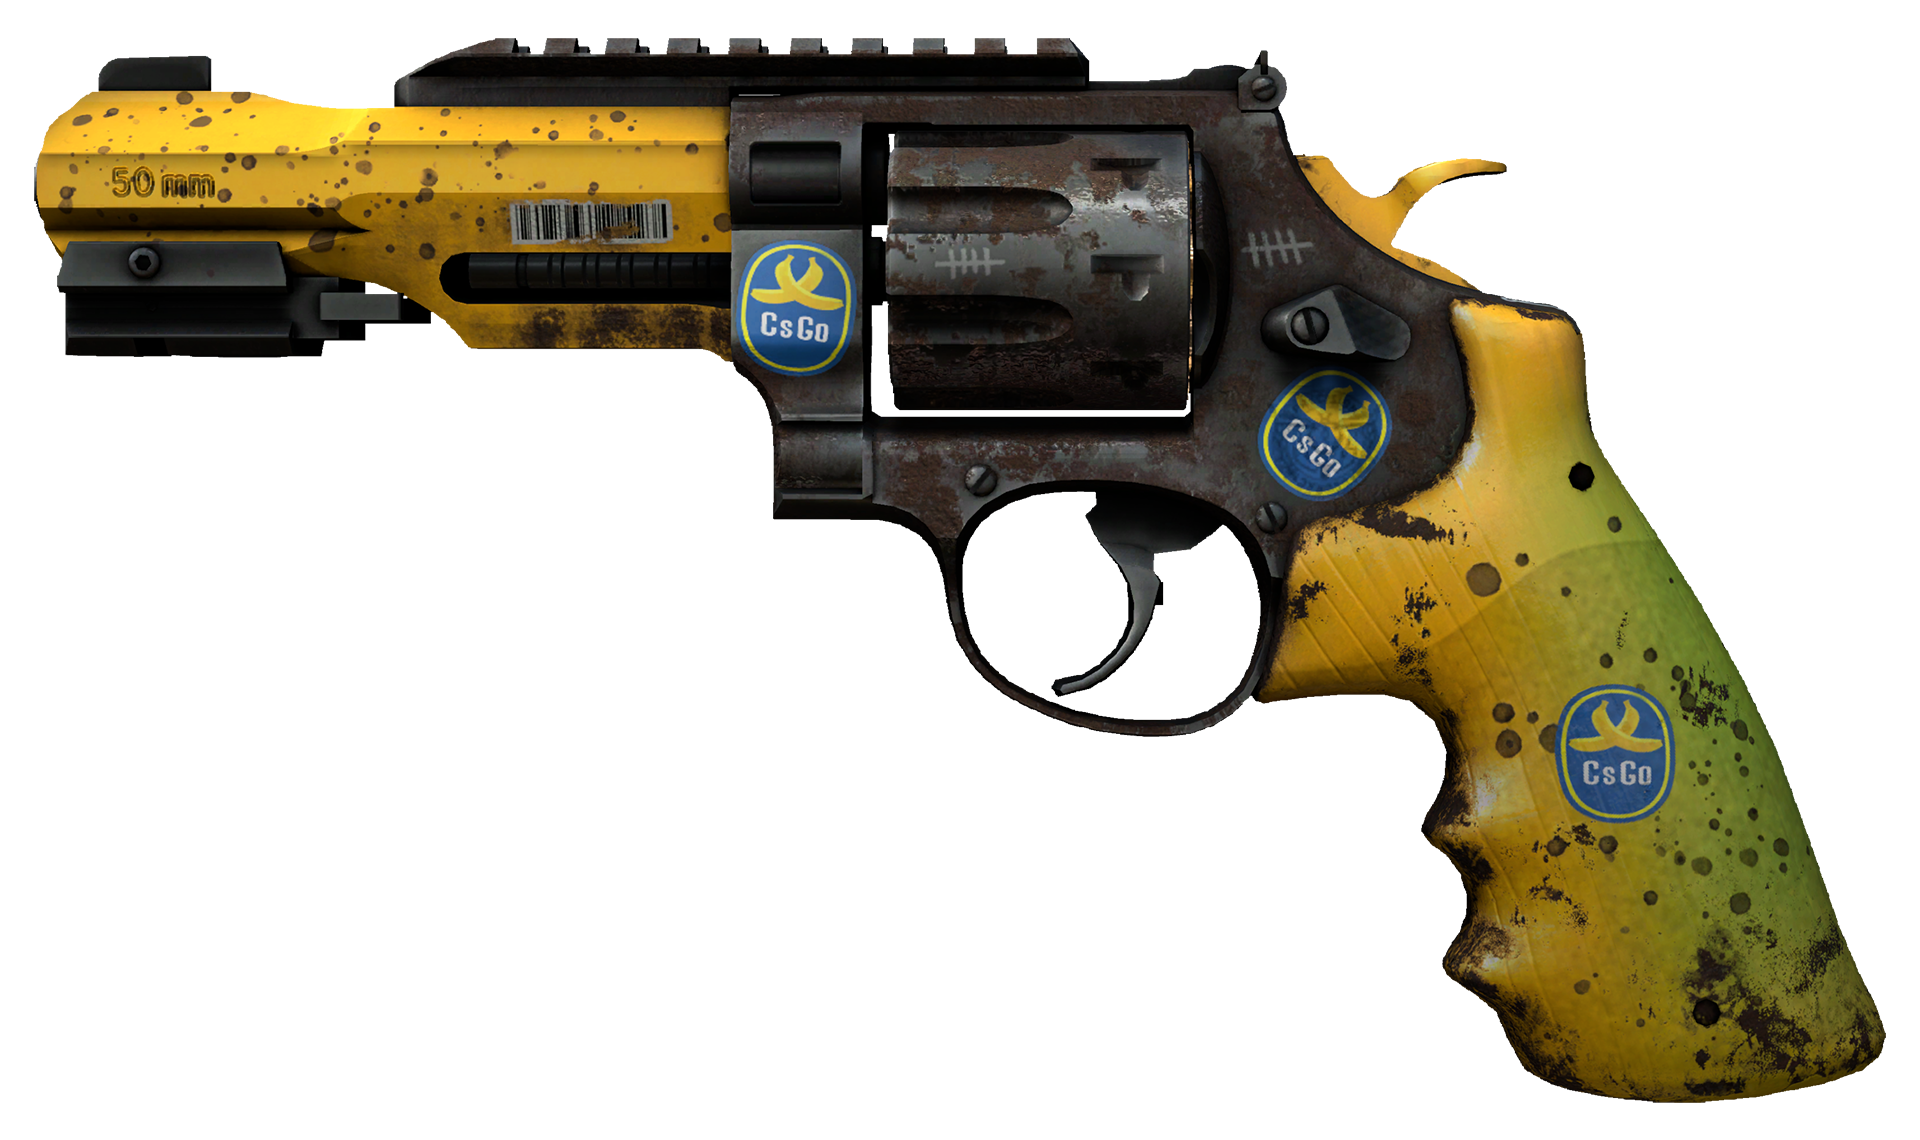 R8 Revolver Banana Cannon Large Rendering